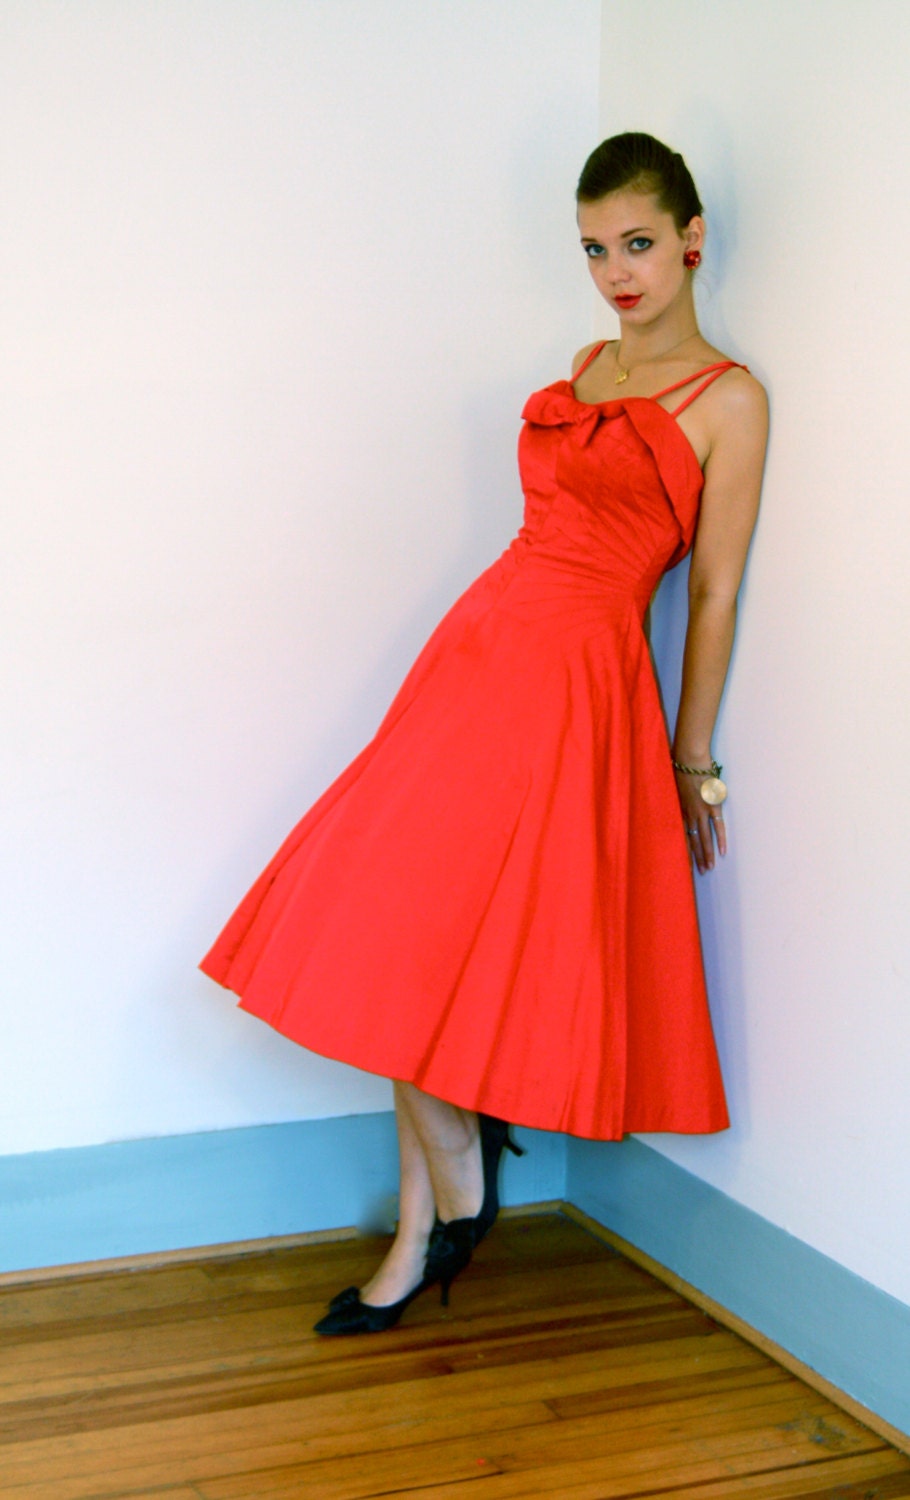 Vintage 1950s Fancy Red Satin Party Dress Full Sweep Circle Skirt Spaghetti Strap Sweetheart neckline 50s New Look Cocktail Frock - posiesforlulu